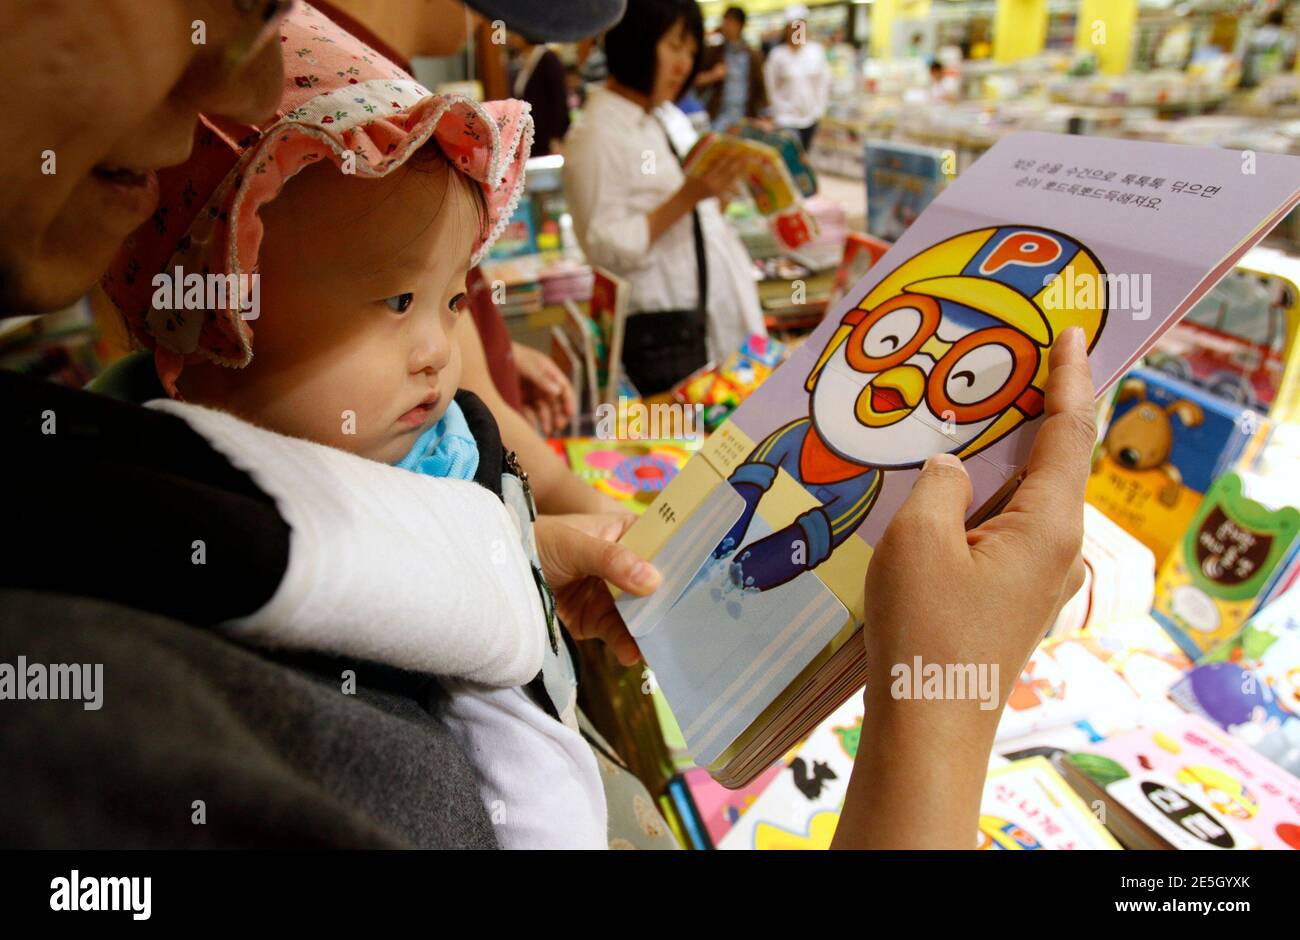 A baby looks at the cartoon character Pororo at a book store in Seoul May  16, 2011. He's roly poly, wears a yellow aviator's helmet and orange  goggles, and is everywhere in